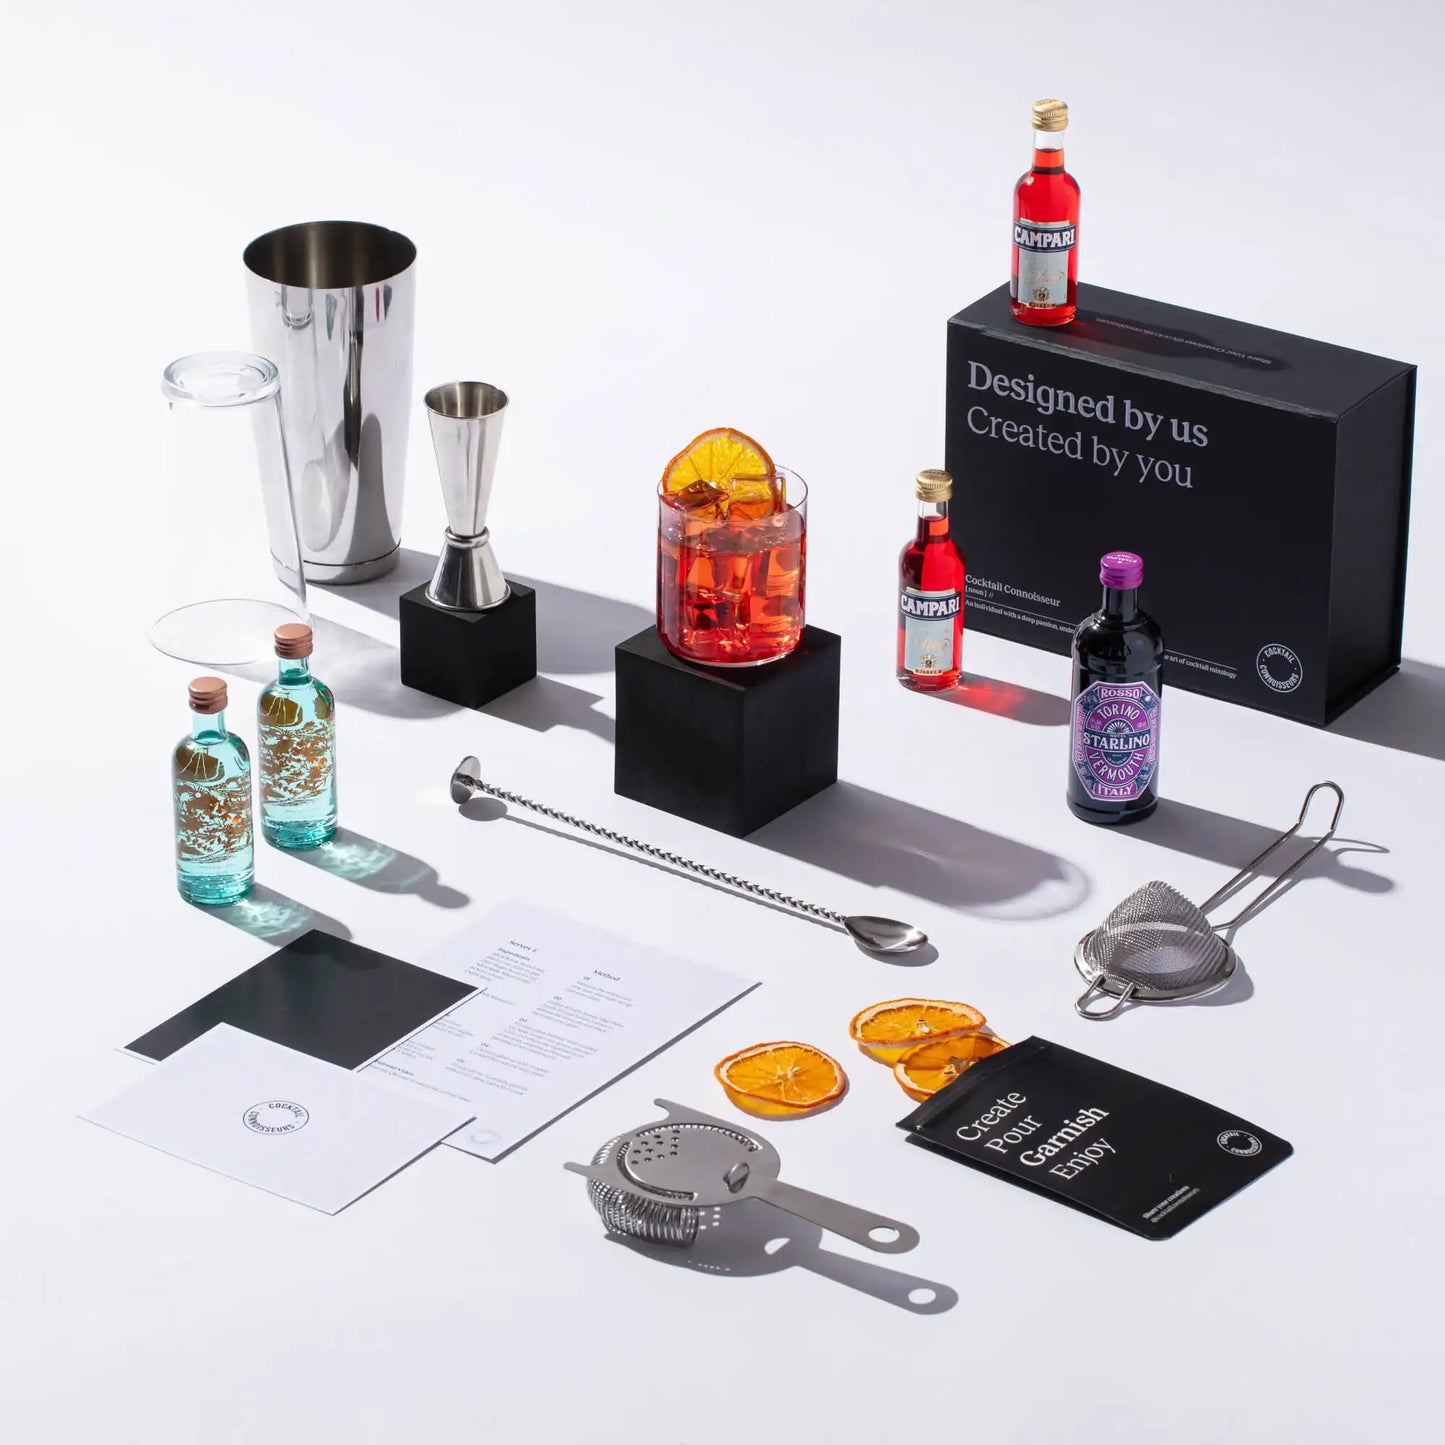 Negroni cocktail kit gift set with advanced bar equipment in gift box